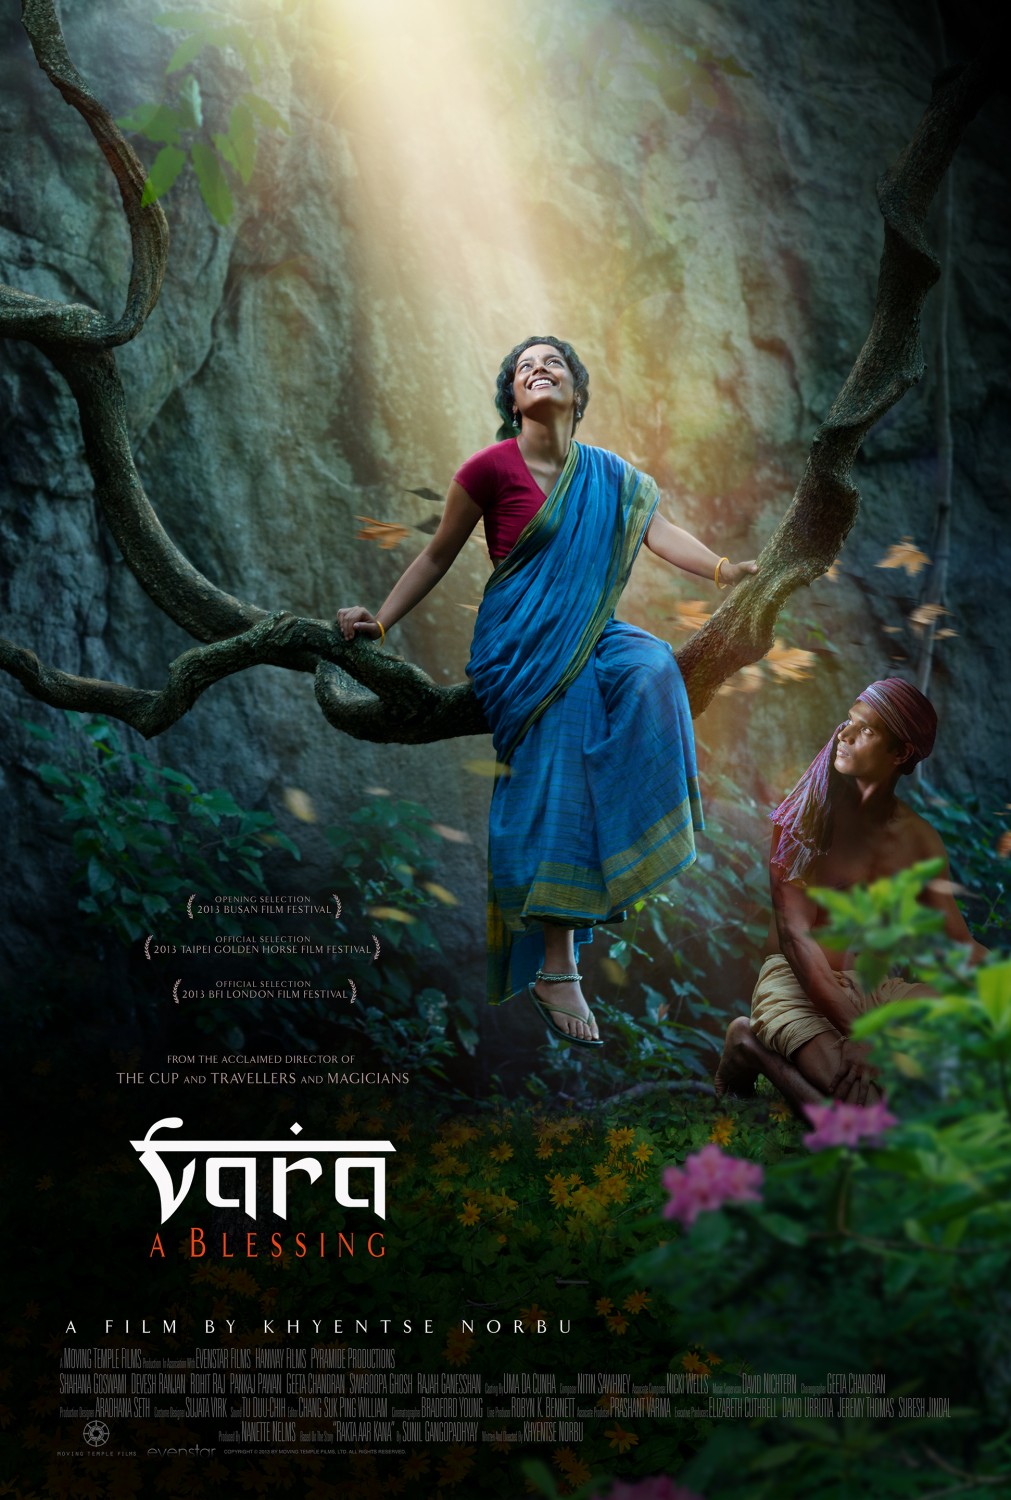 Extra Large Movie Poster Image for Vara: A Blessing 